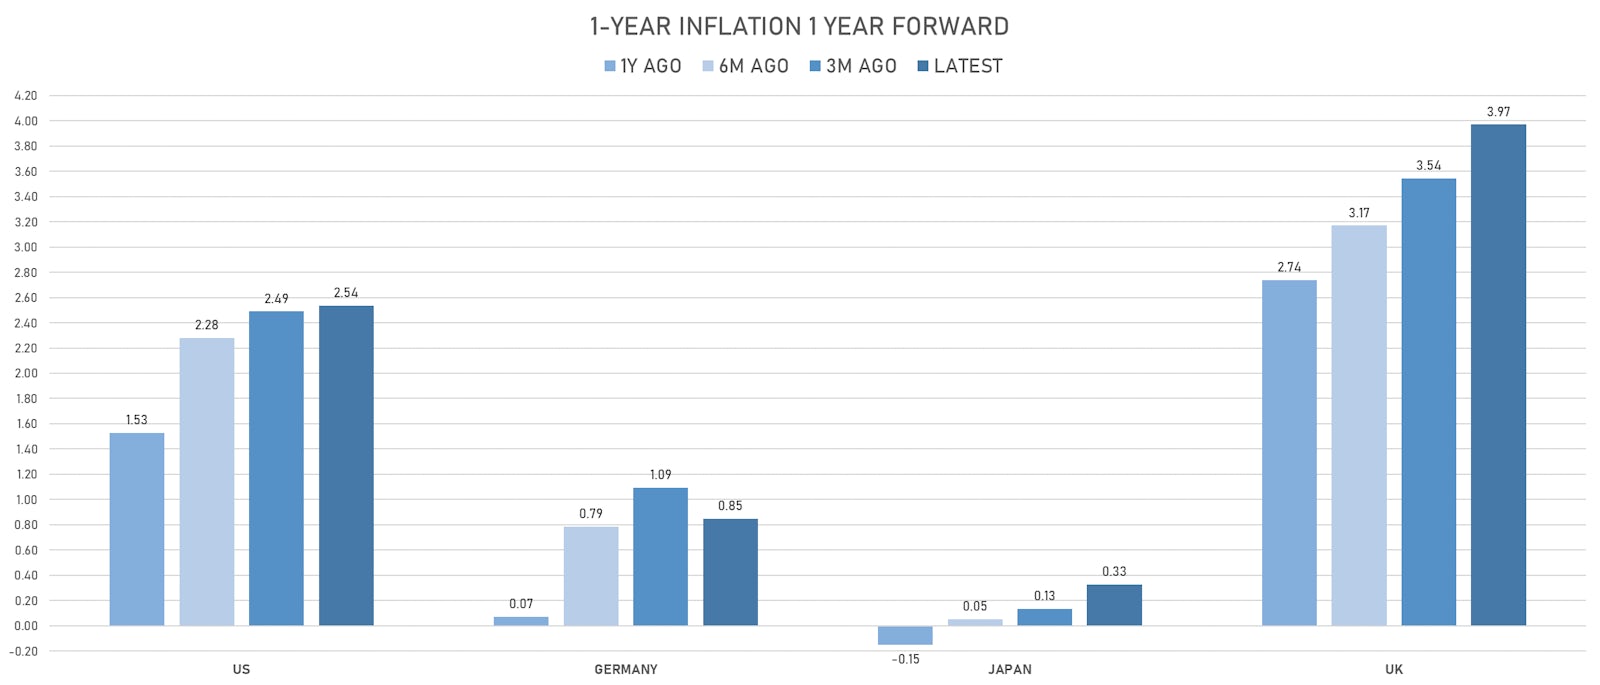 1-Year Forward Short-Term Inflation In The US, Germany, Japan, UK | Sources: ϕpost, Refinitiv data